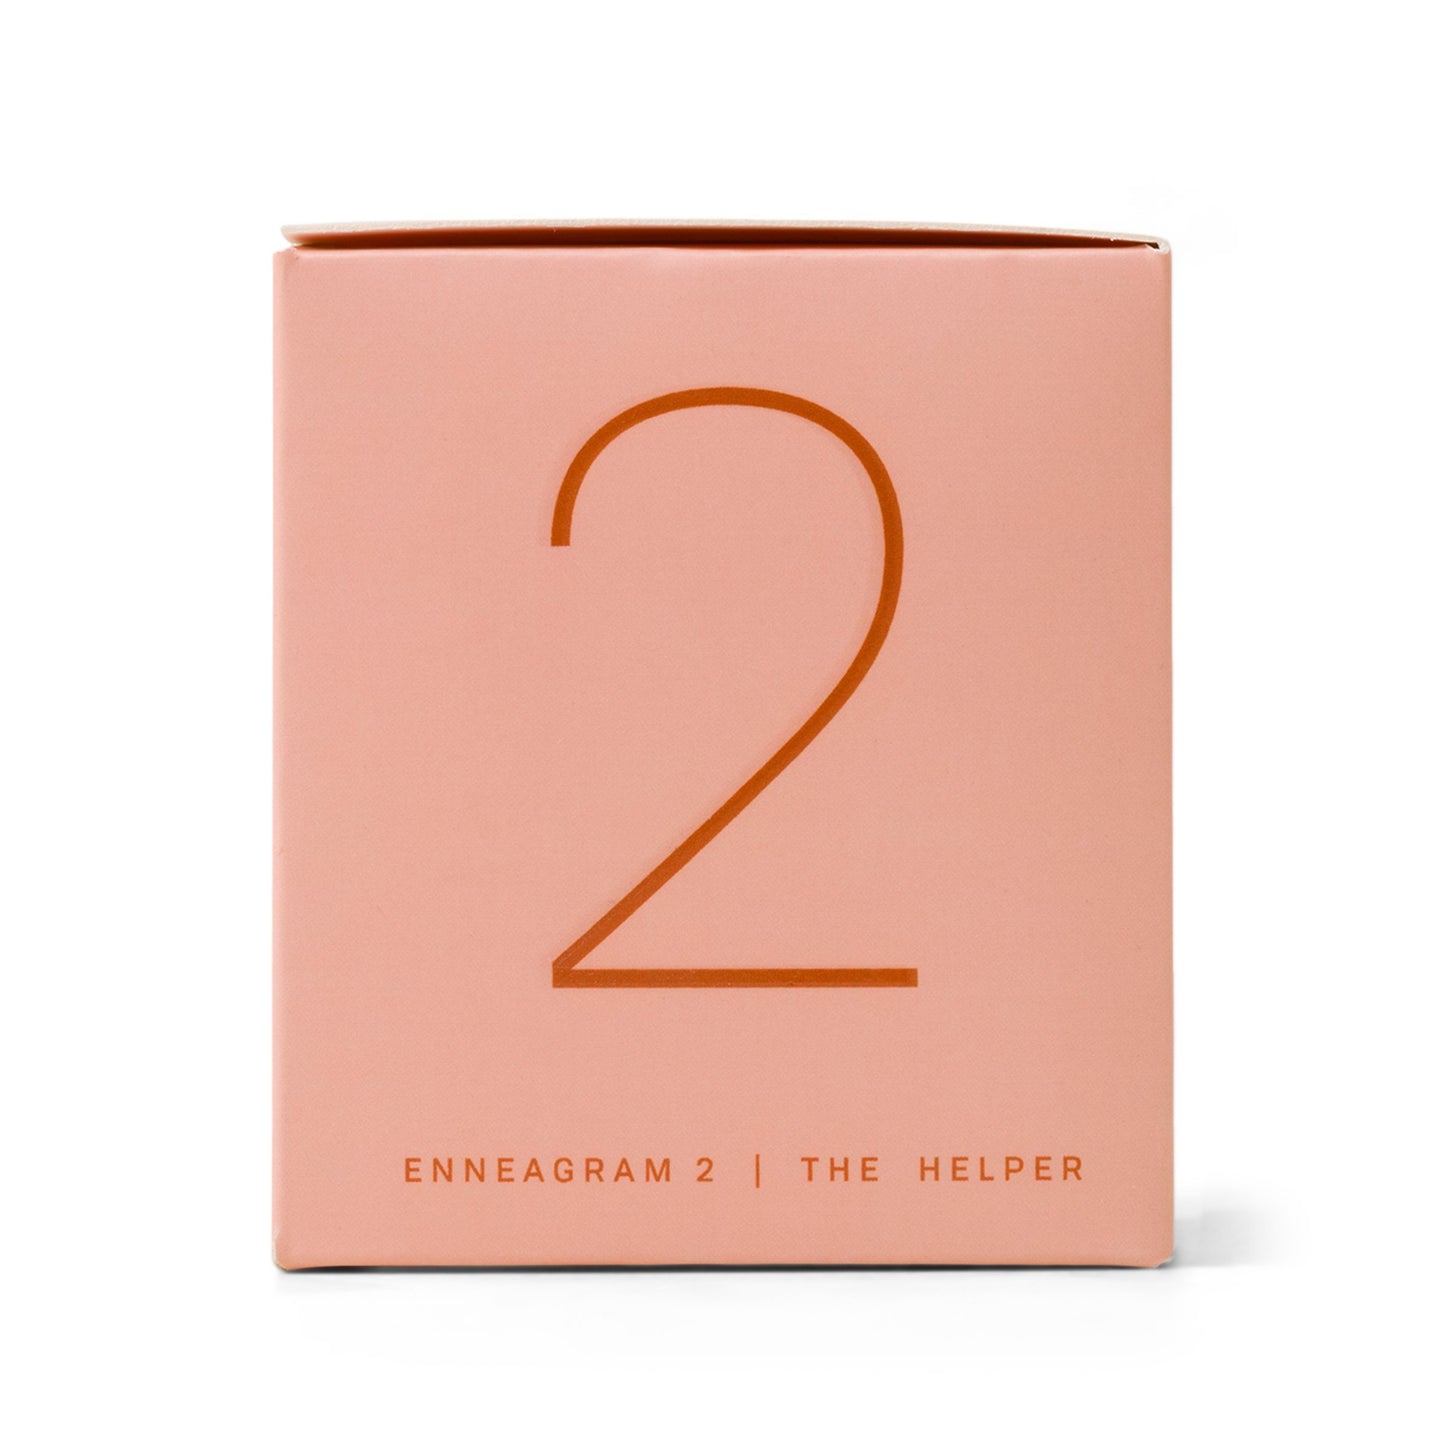 Pink box with "the helper" printed on the front; Also has the number 2 printed on the side